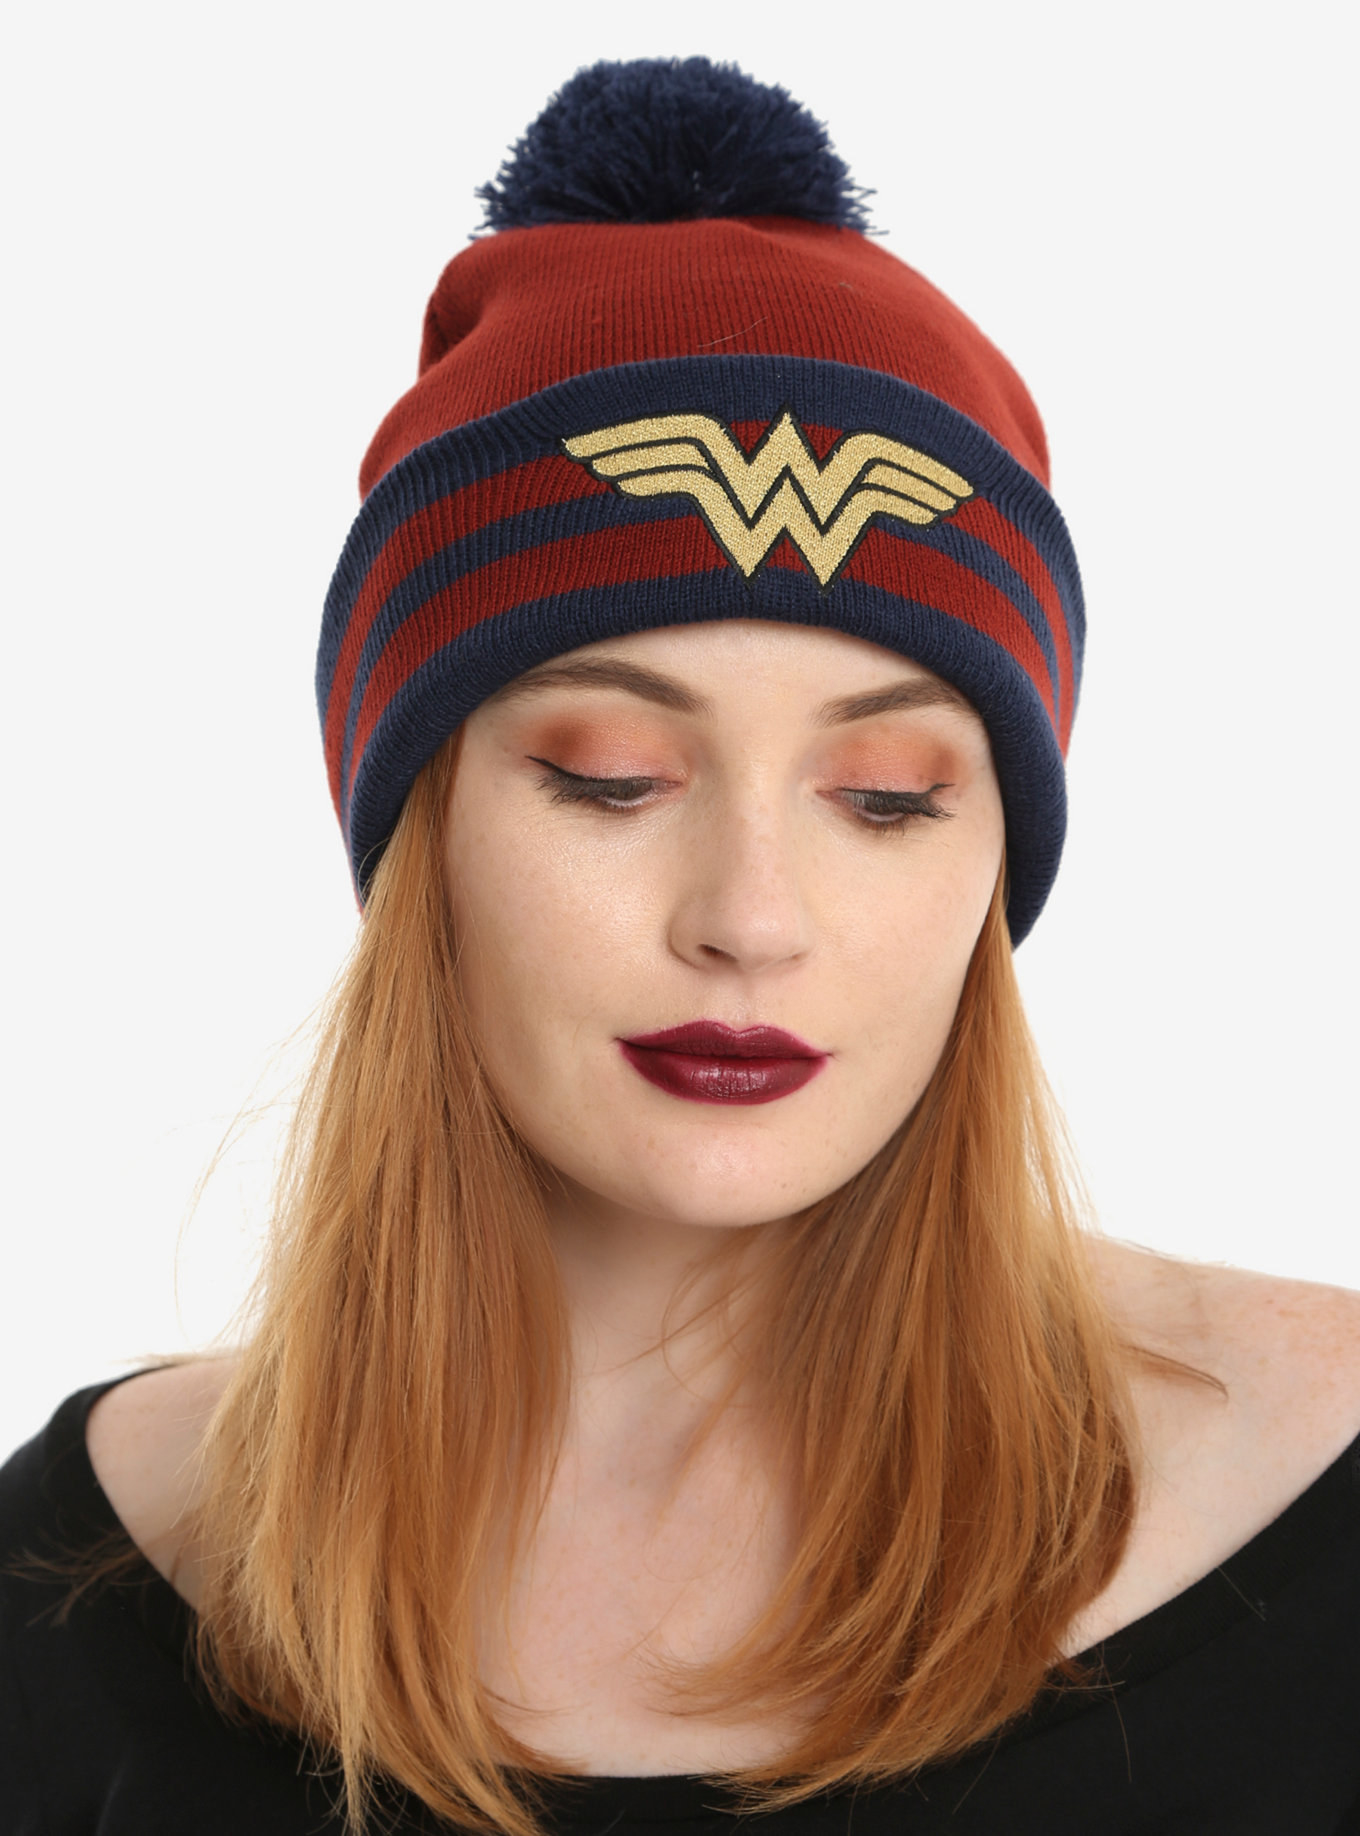 And I believe I deserve to own this hat. hottopic.com. 